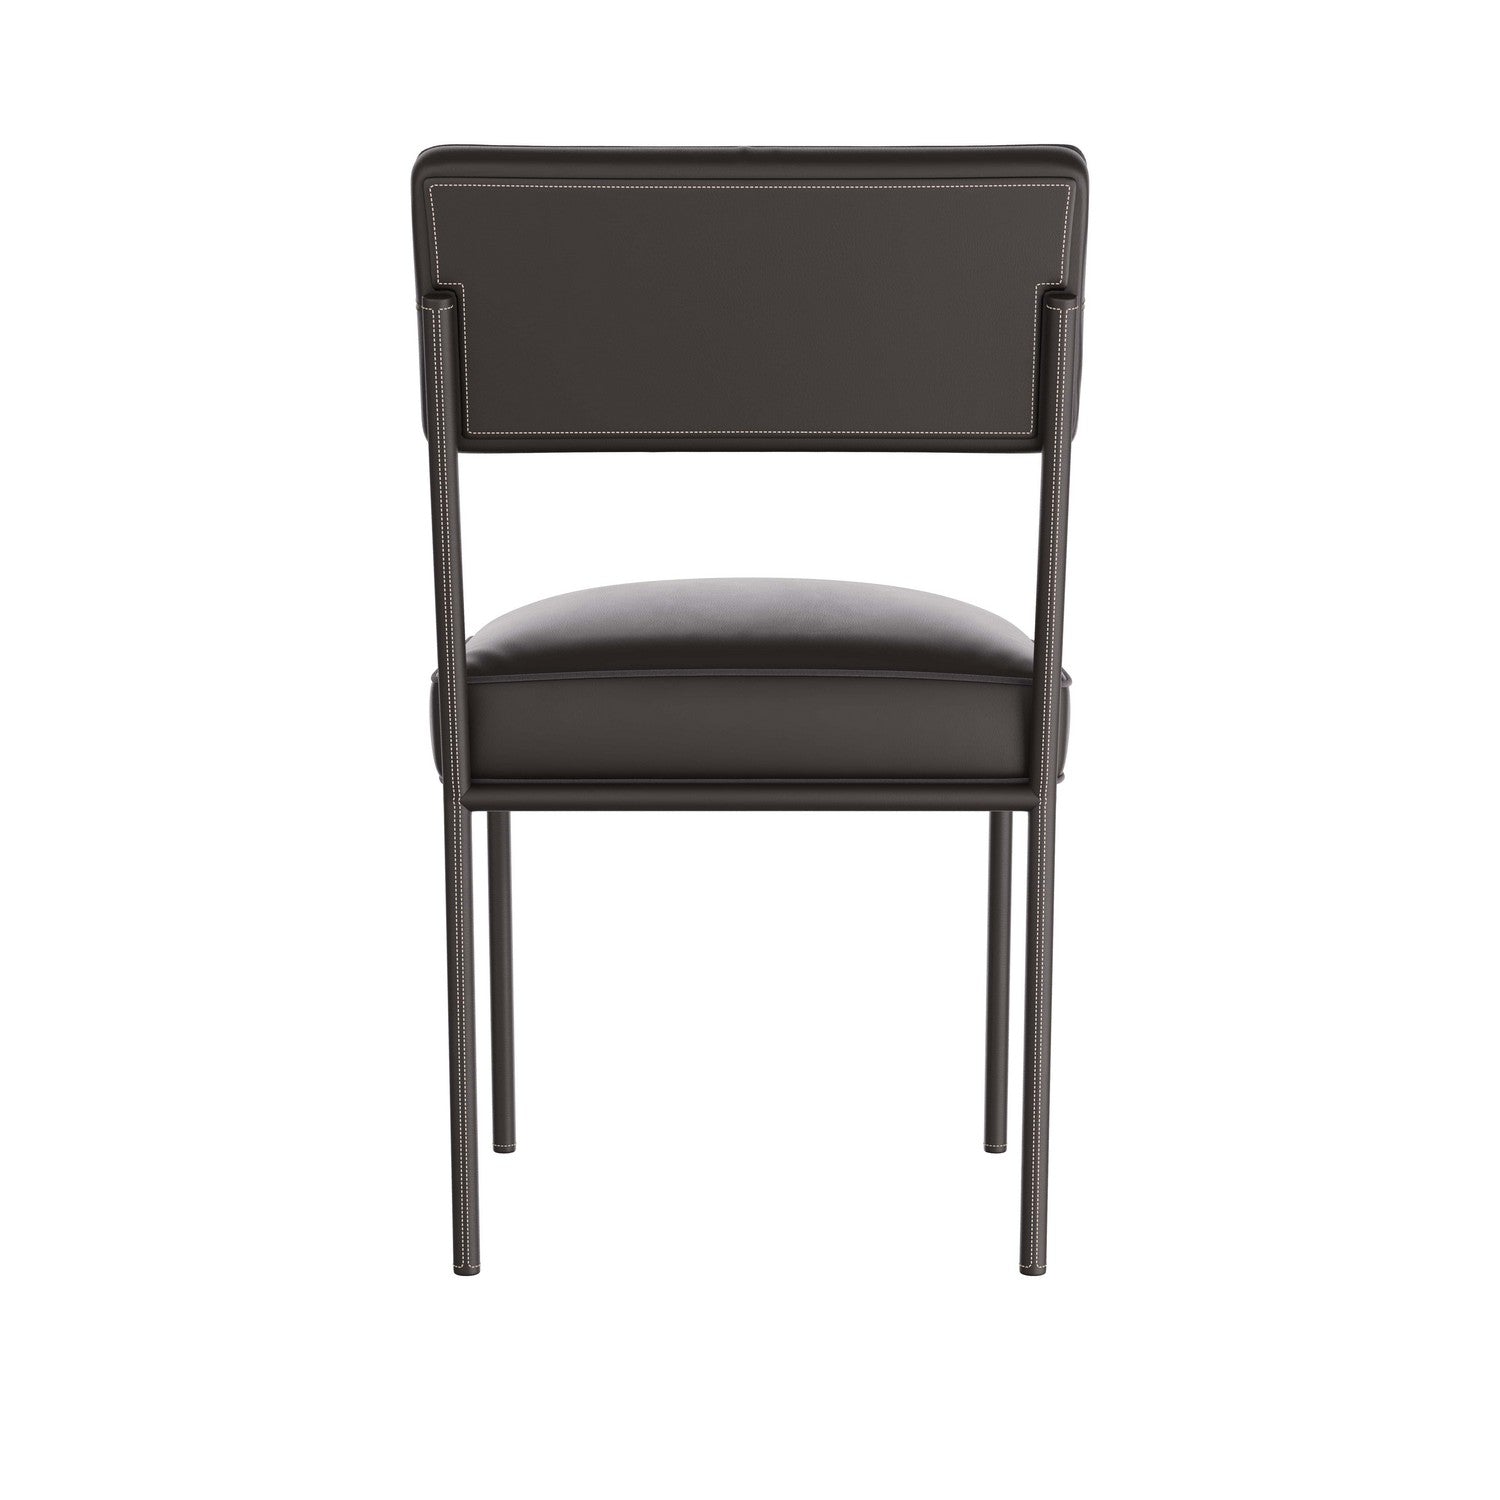 Dining Chair from the Topanga collection in Graphite finish